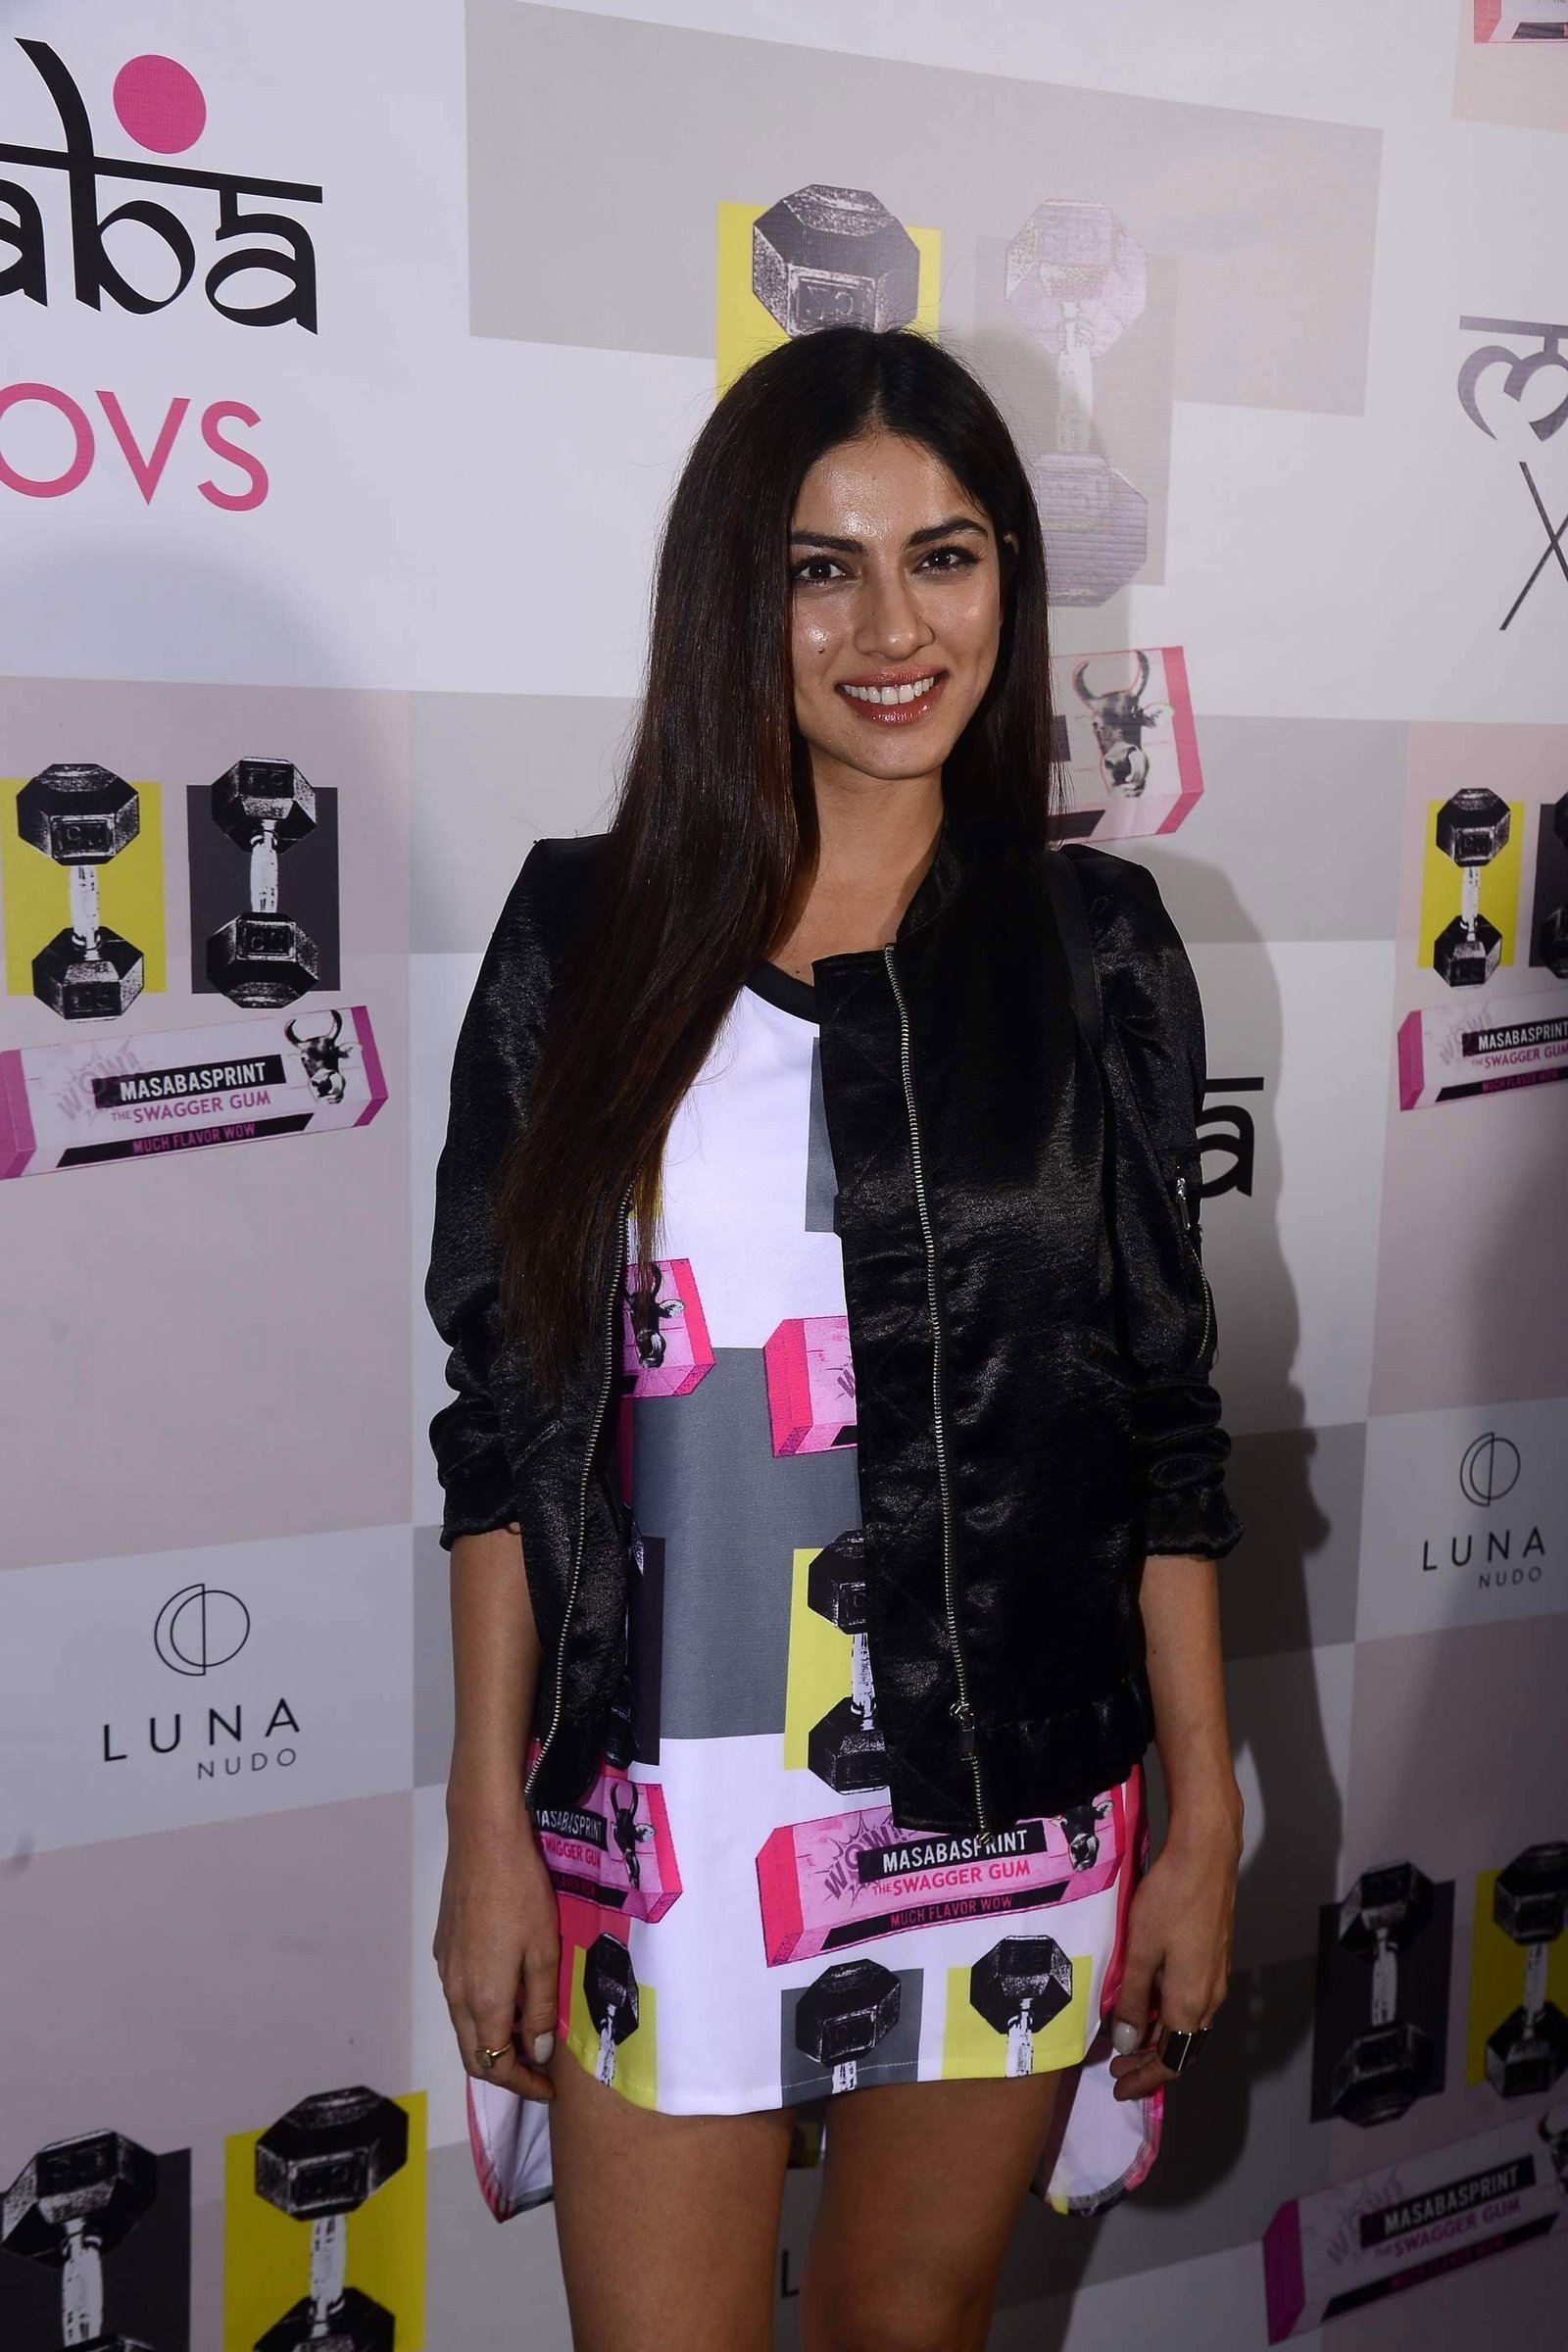 Sapna Pabbi - Celebs attended Masaba Gupta X Koovs Launch Party Images | Picture 1472821